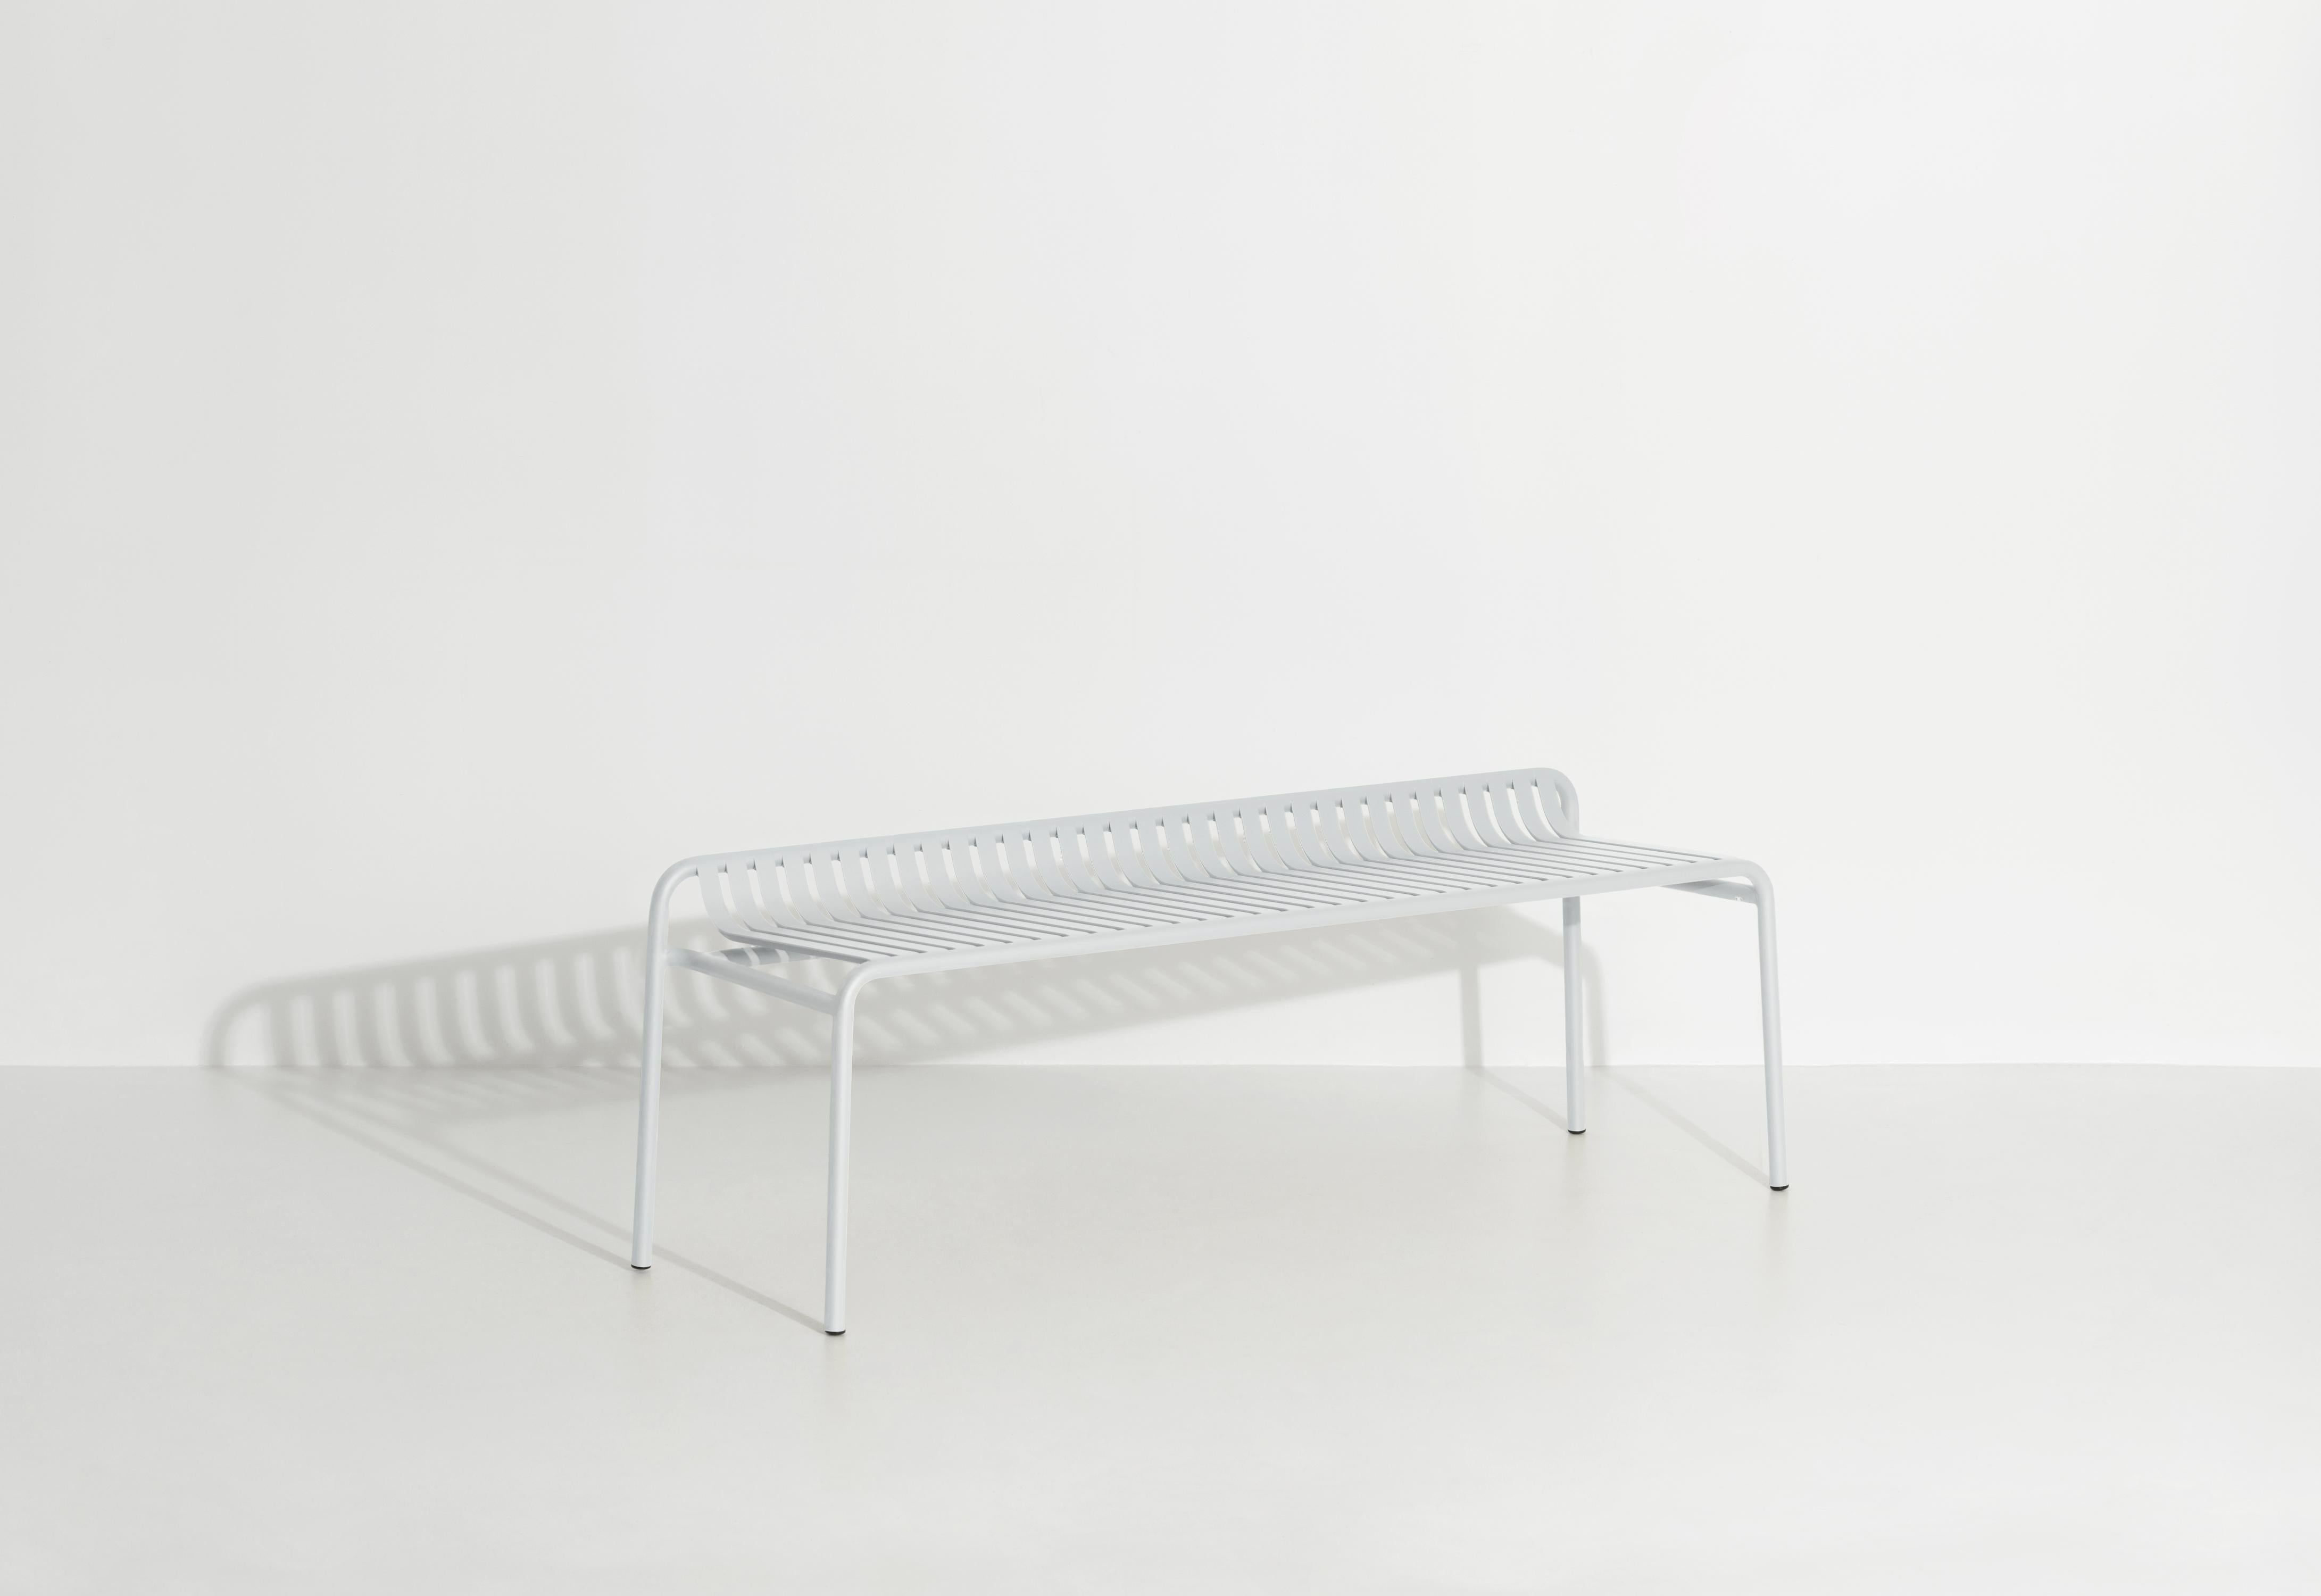 Petite Friture Week-End Bench without Back in Pearl Grey Aluminium by Studio BrichetZiegler, 2017

The week-end collection is a full range of outdoor furniture, in aluminium grained epoxy paint, matt finish, that includes 18 functions and 8